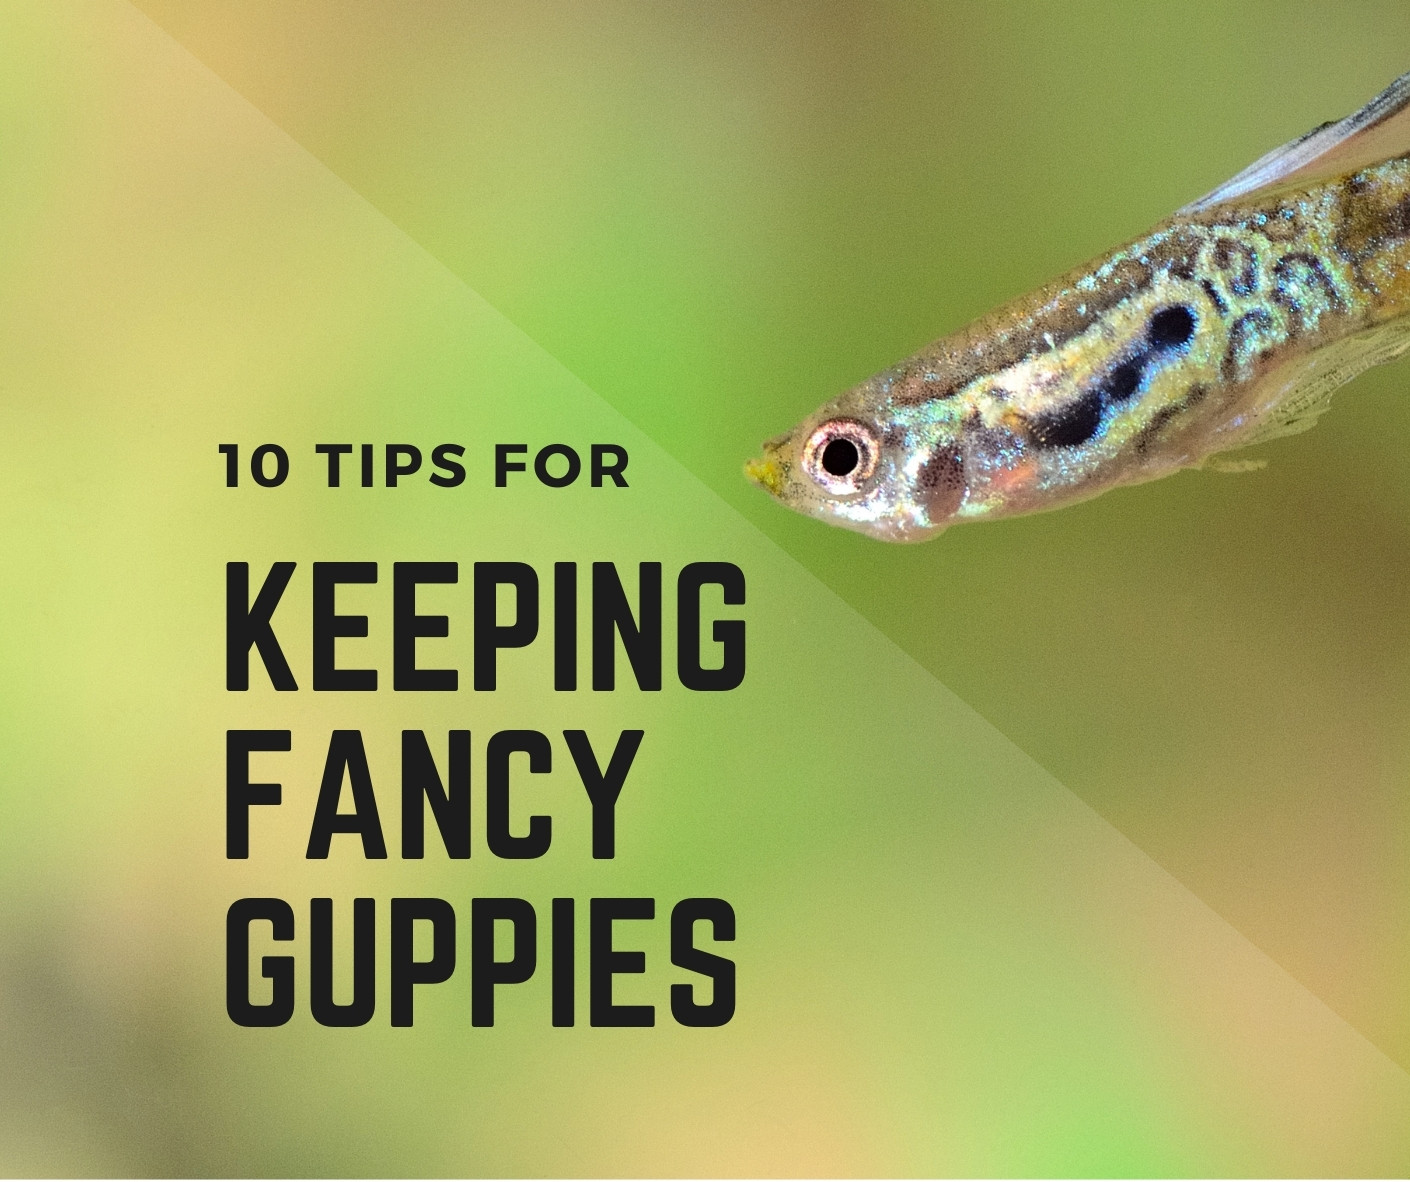 Tips For Keeping Fancy Guppies